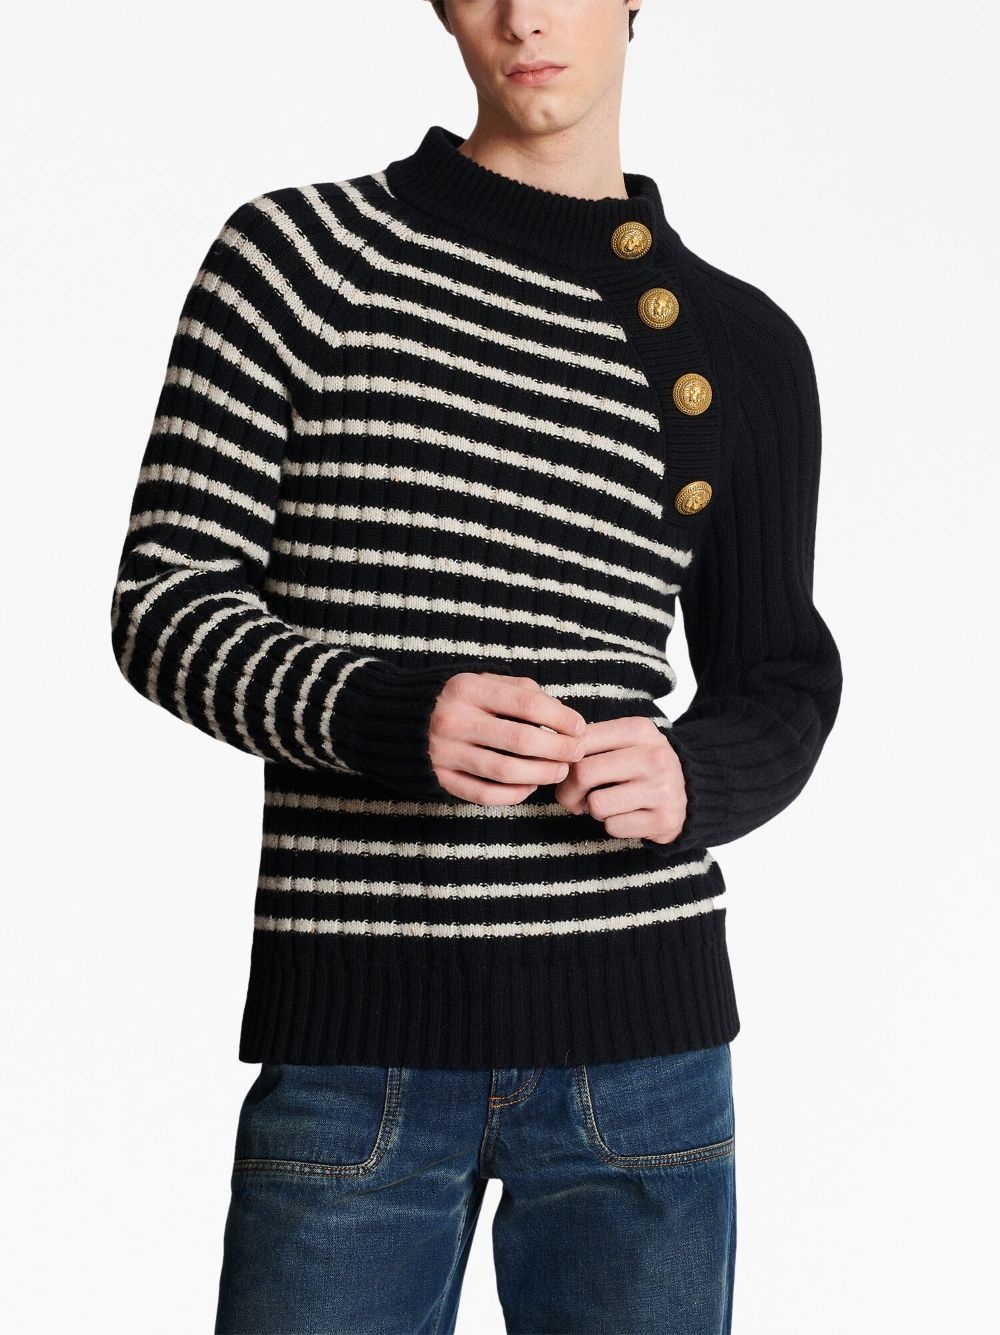 embossed-button striped jumper - 6